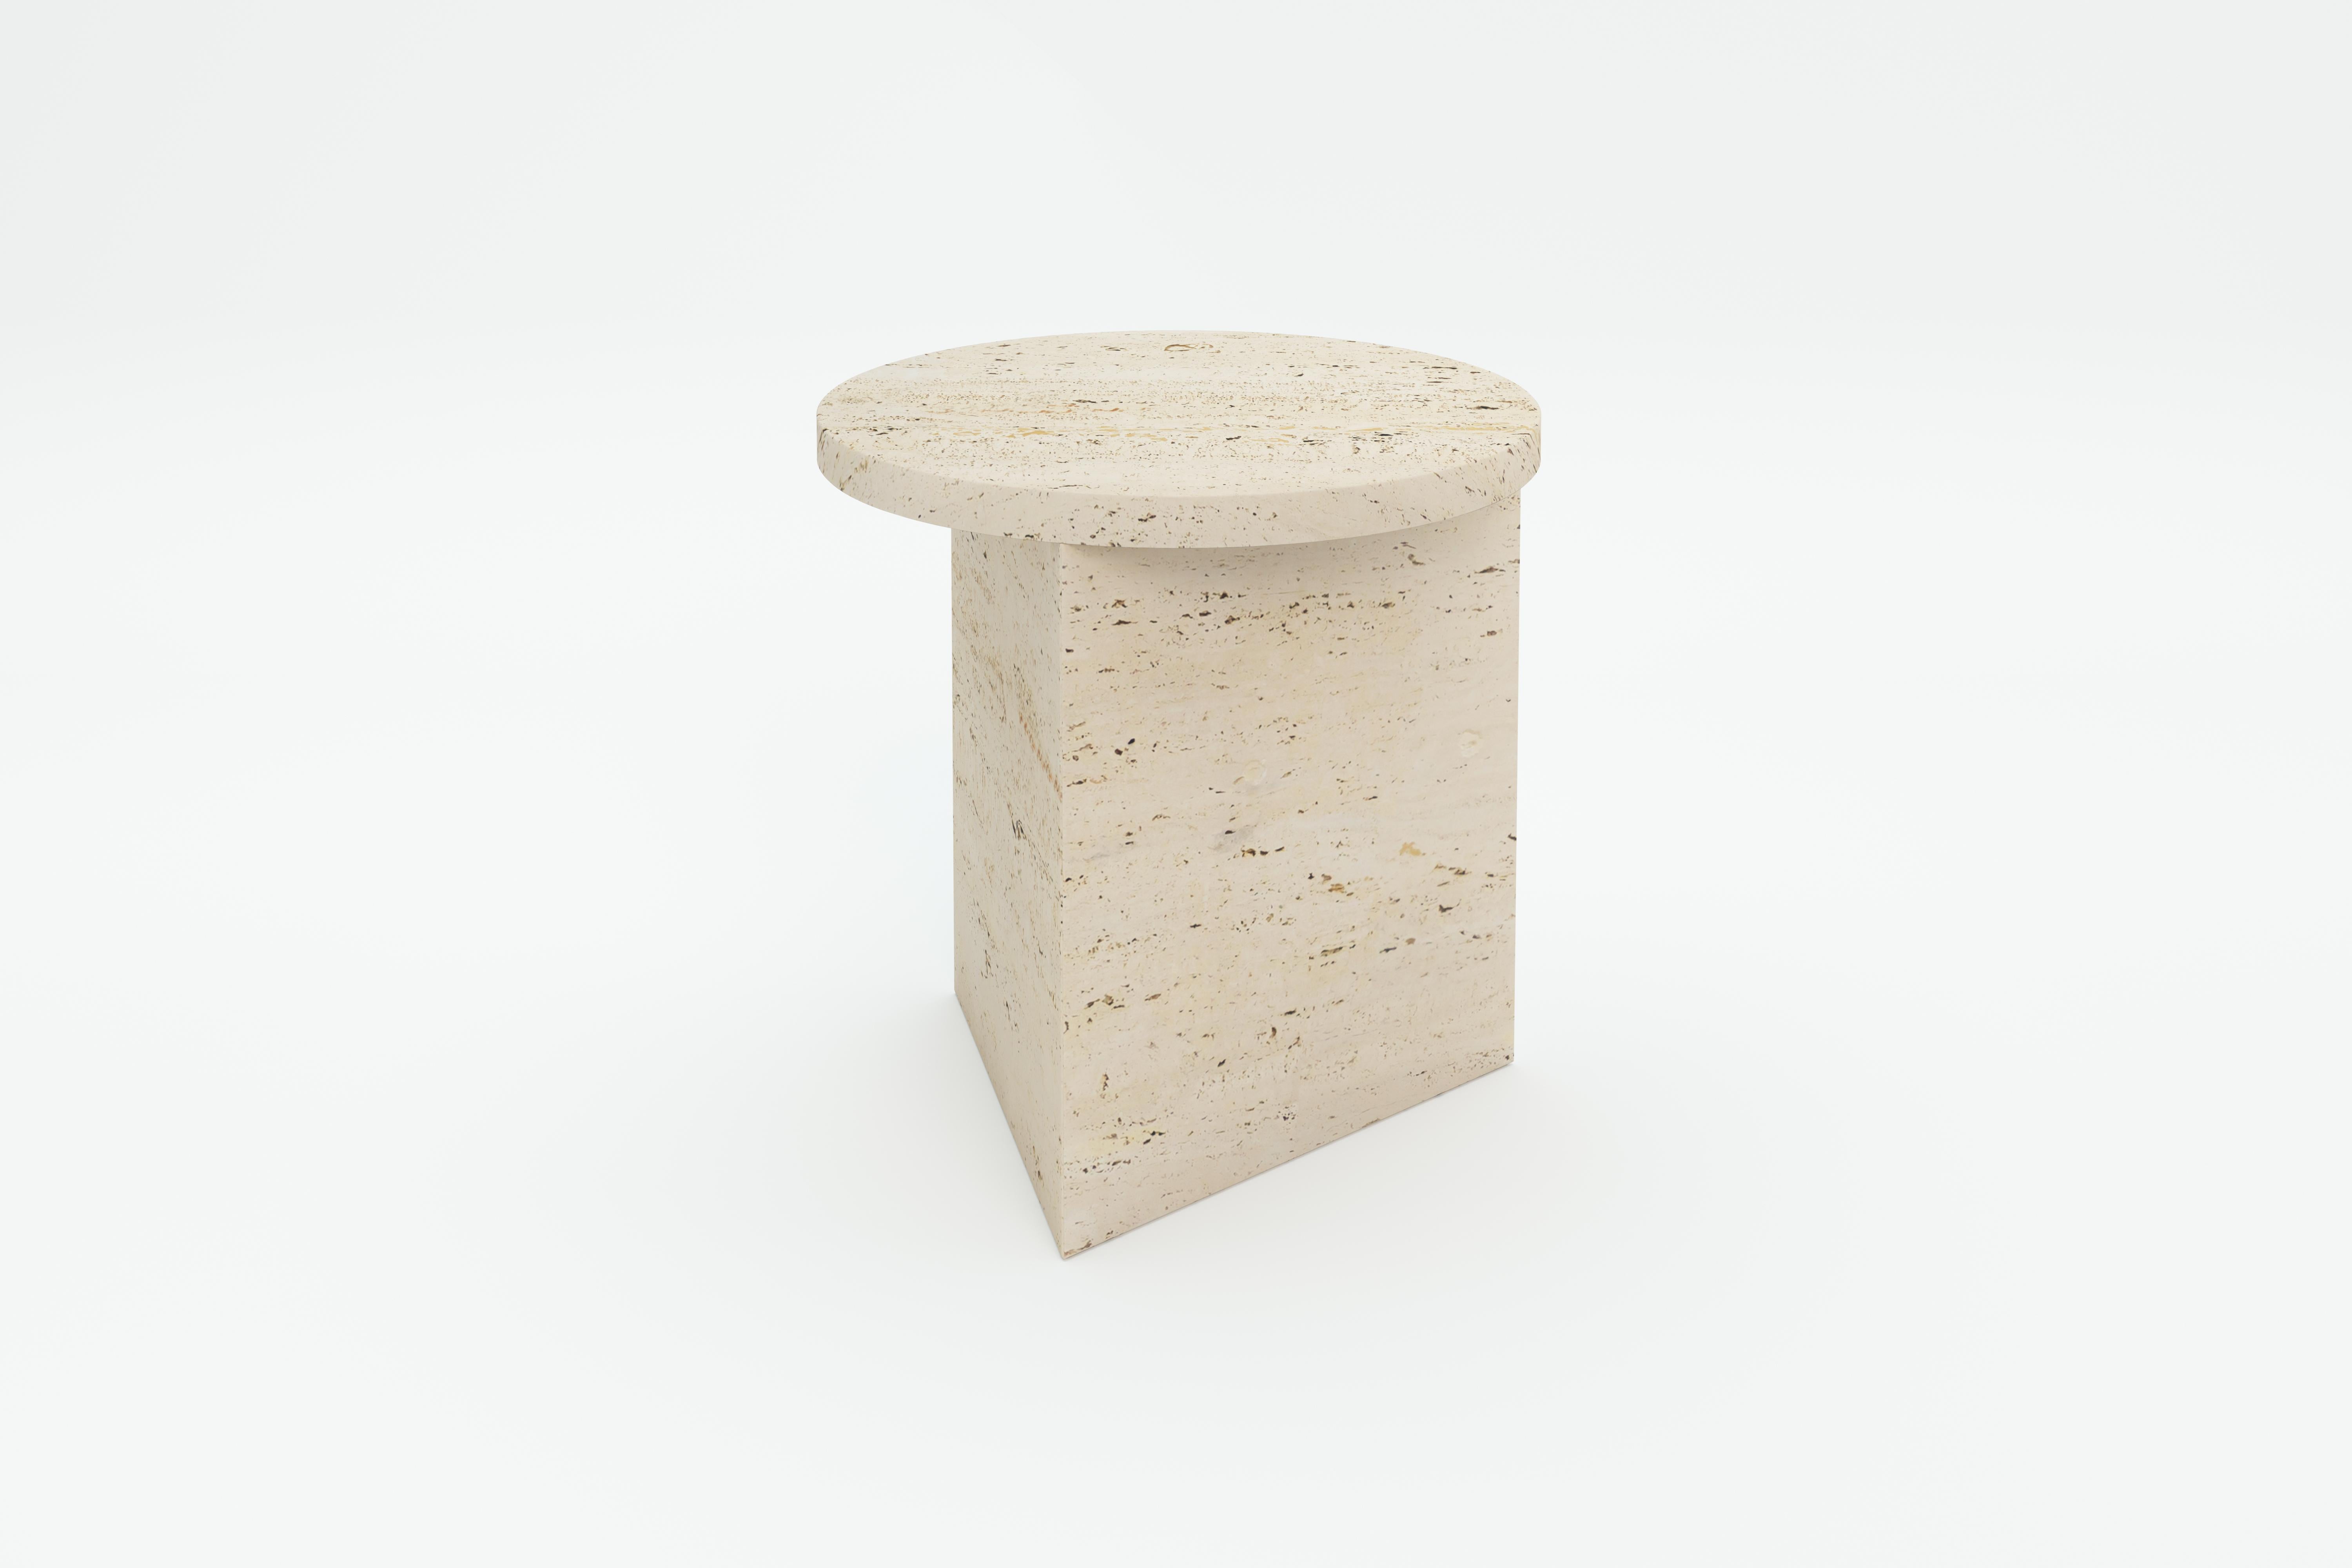 Travertine prisma tall 45 coffee table by Sebastian Scherer
Dimensions: D45x H45 cm
Materials: Travertine.
Weight: 33.1 kg.
Also Available in : Glass, Steel.

All joining edges precisely glued in mitre / all panes glued to one piece / tempered